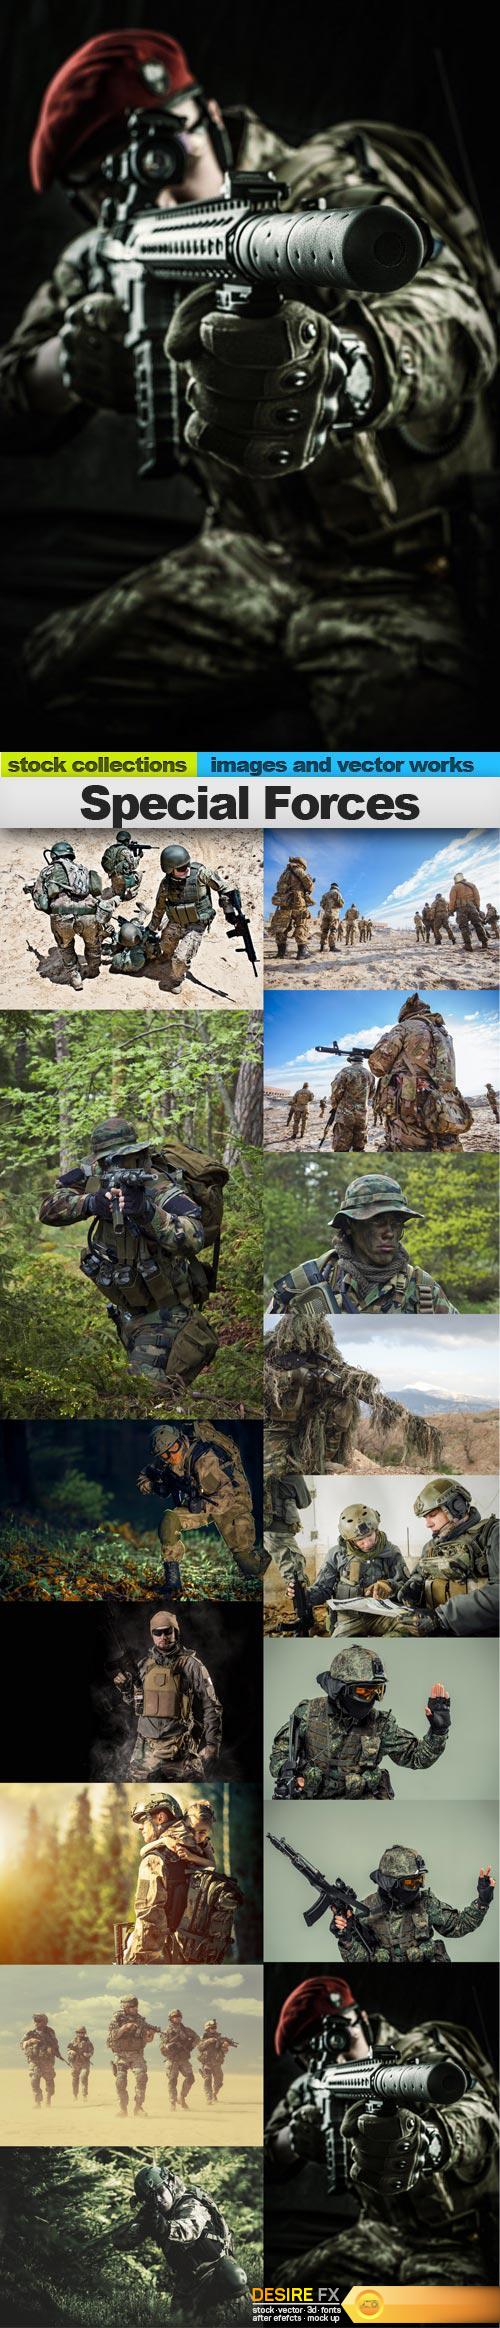 Special Forces, 15 x UHQ JPEG